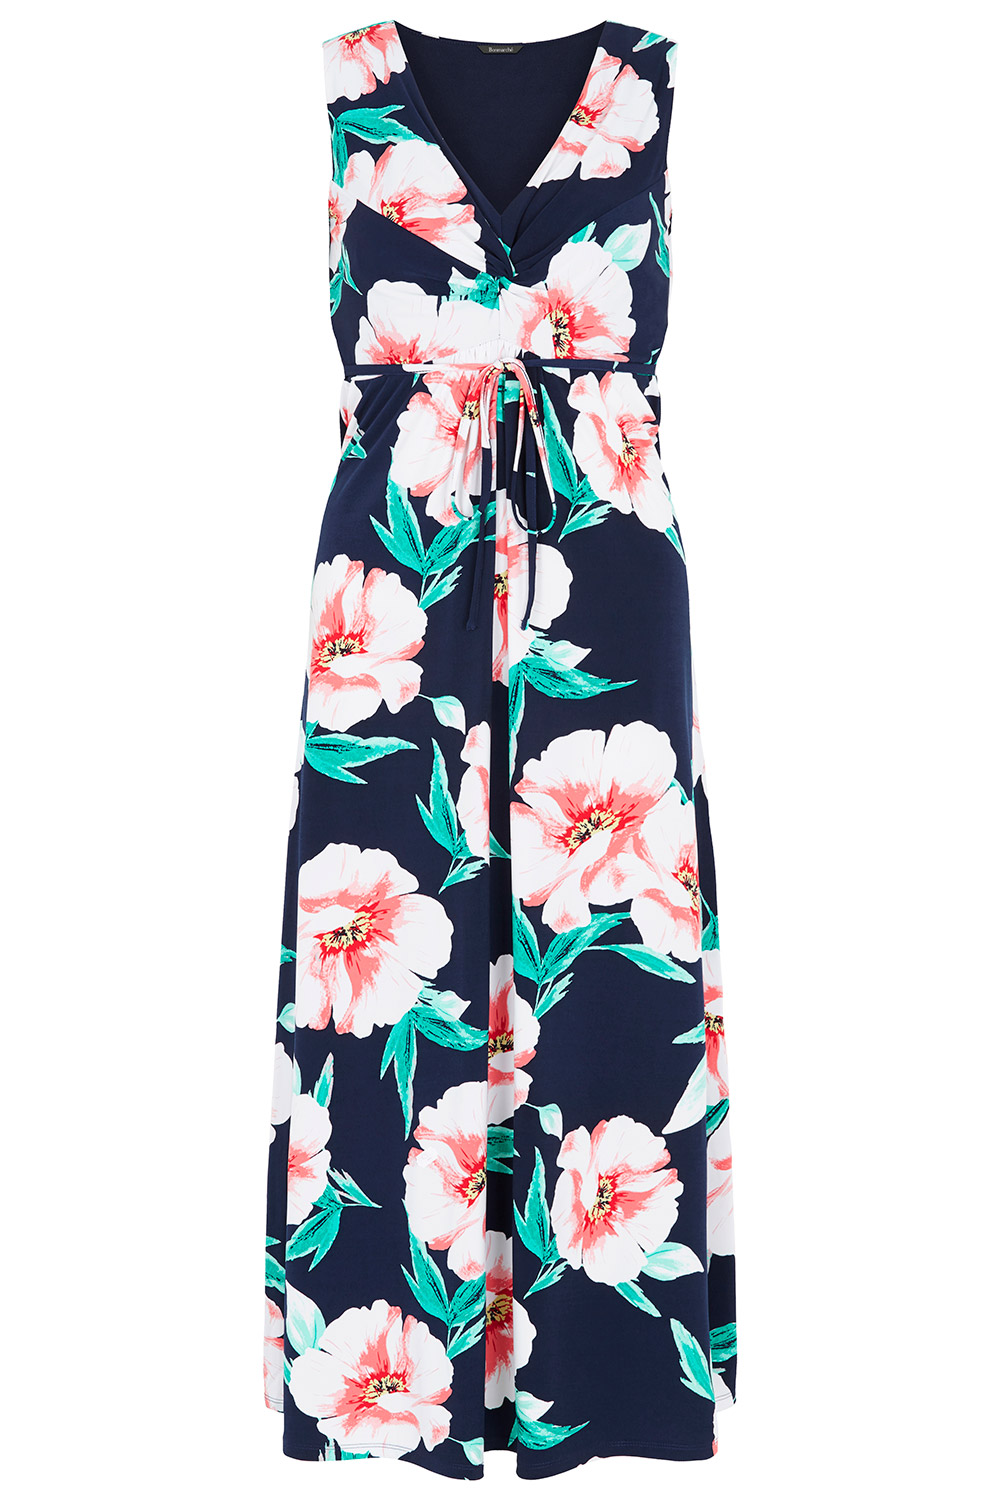 2 in 1 Printed Maxi Dress and Shrug